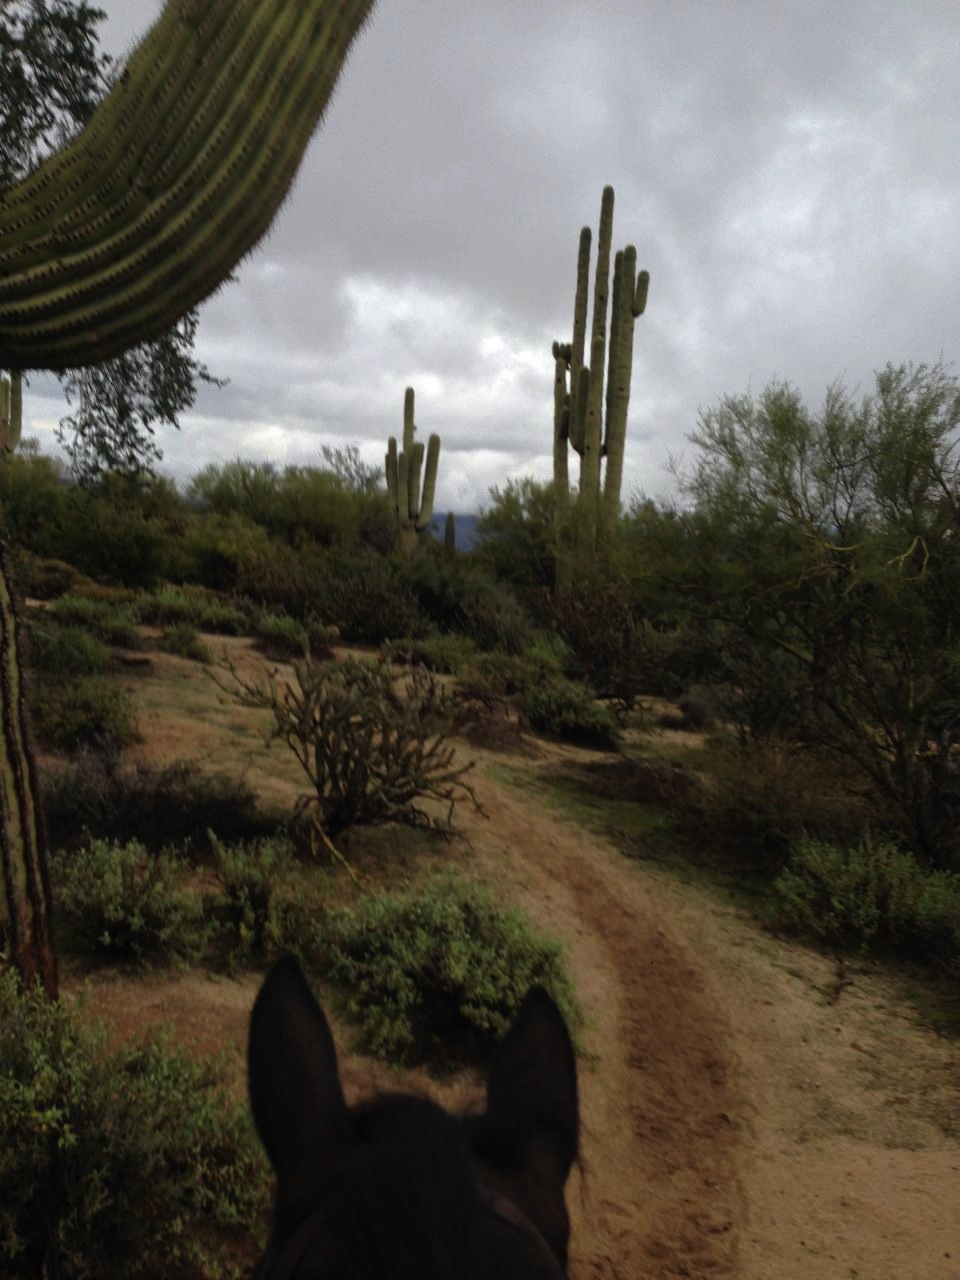 Barb and Eveready trail ride at home in the Sonoran Desert of Scottsdale, Arizona. (Photo courtesy of Barb Crabo)